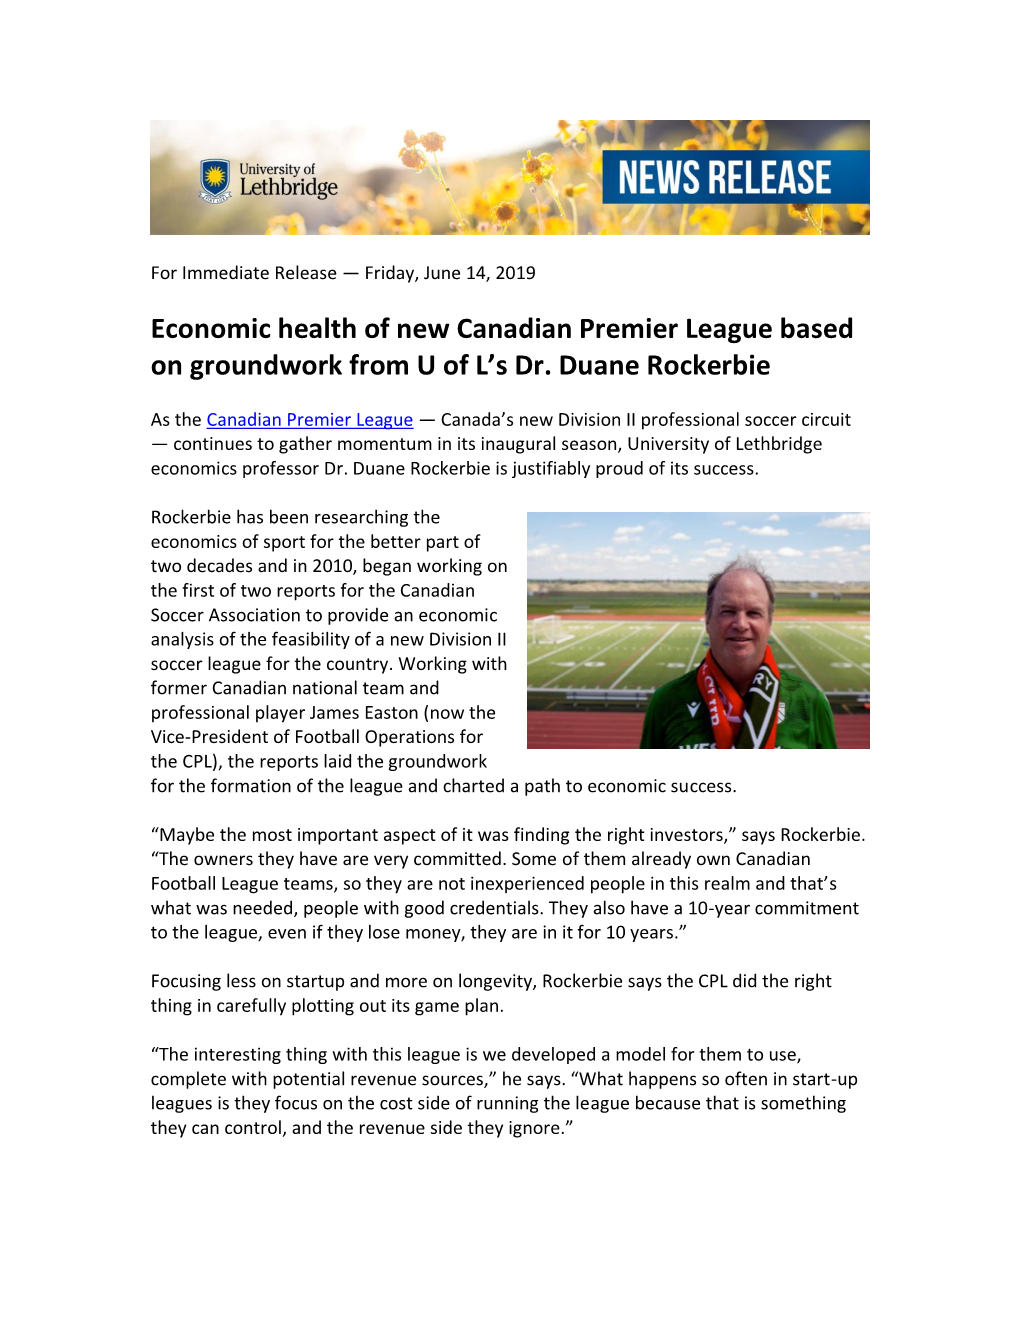 Economic Health of New Canadian Premier League Based on Groundwork from U of L’S Dr